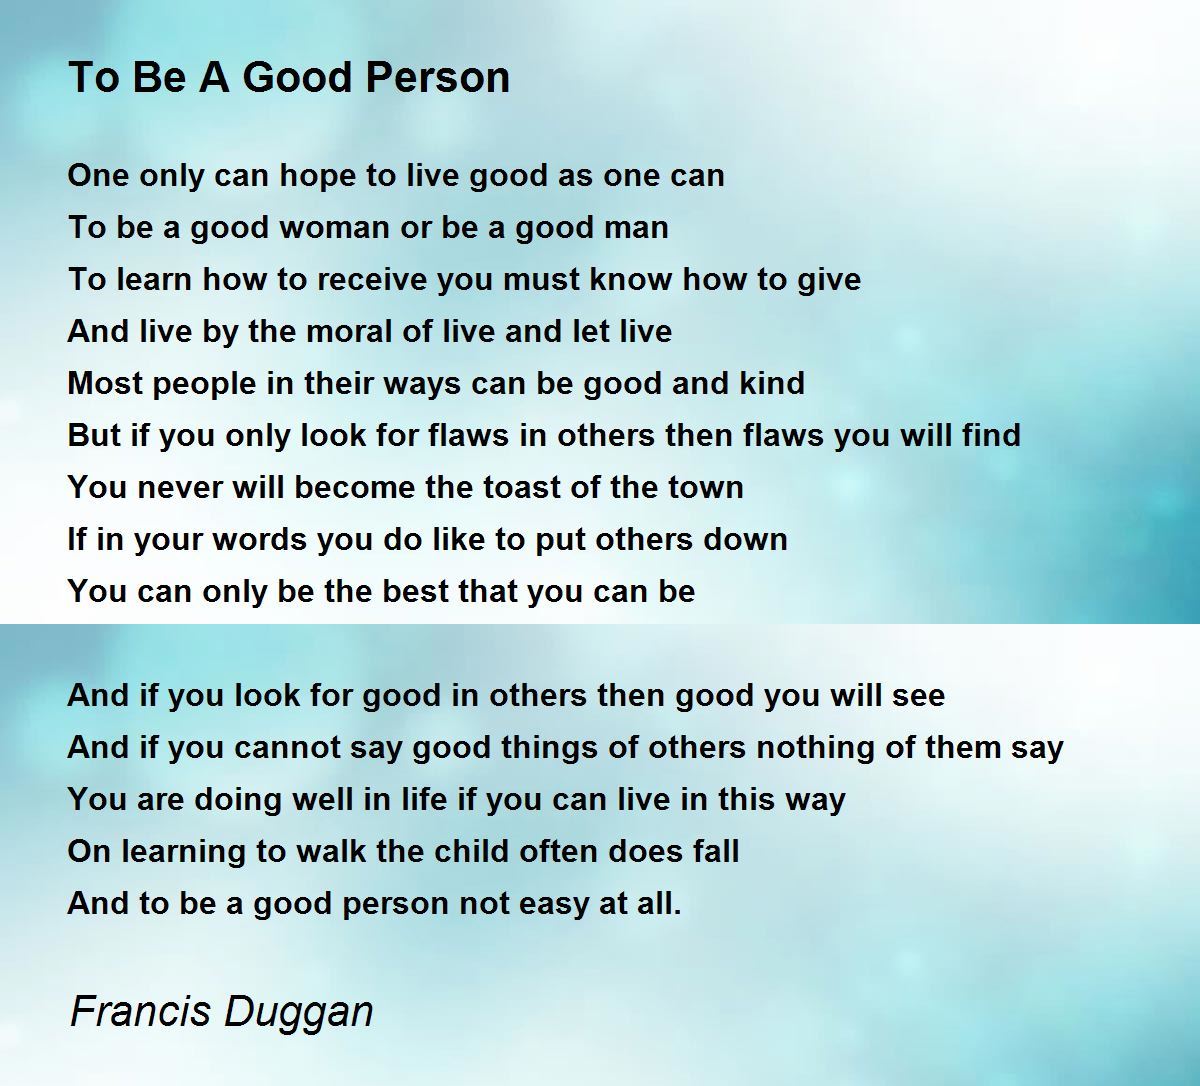 essay on how to be a good person